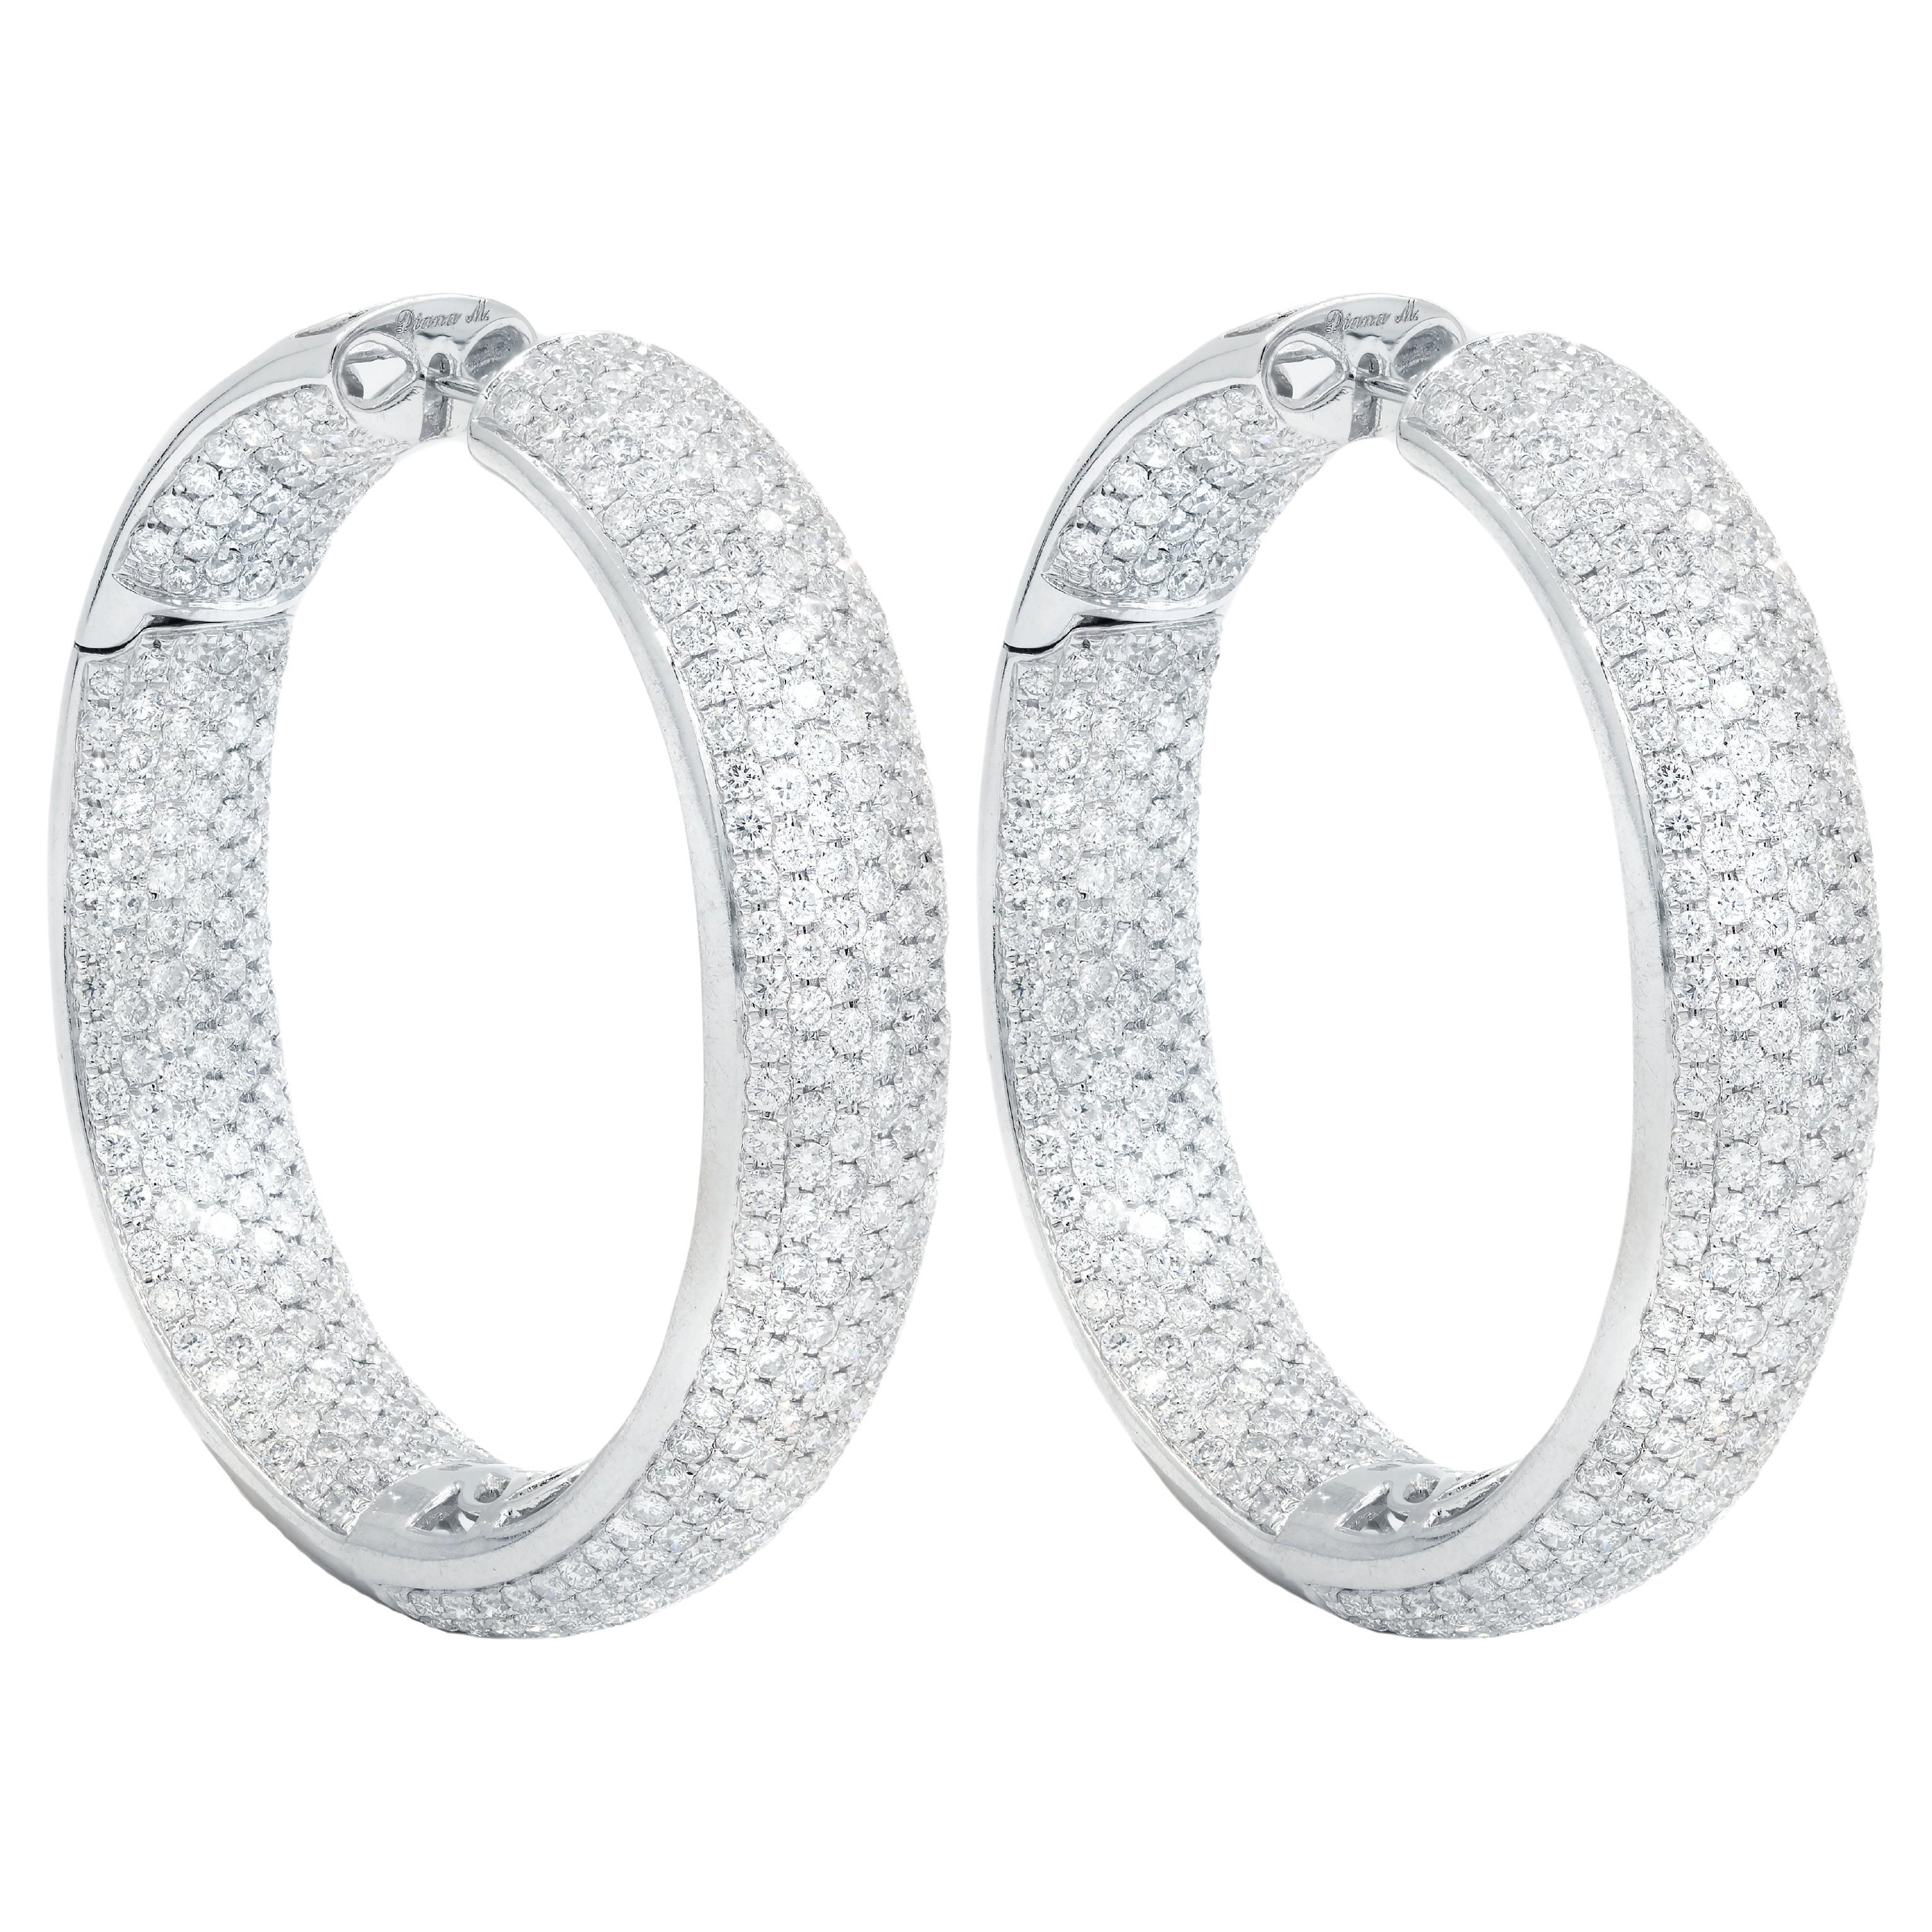 Diana M. 18 kt white gold inside-out hoop earrings adorned with 5 rows of 16.75  For Sale